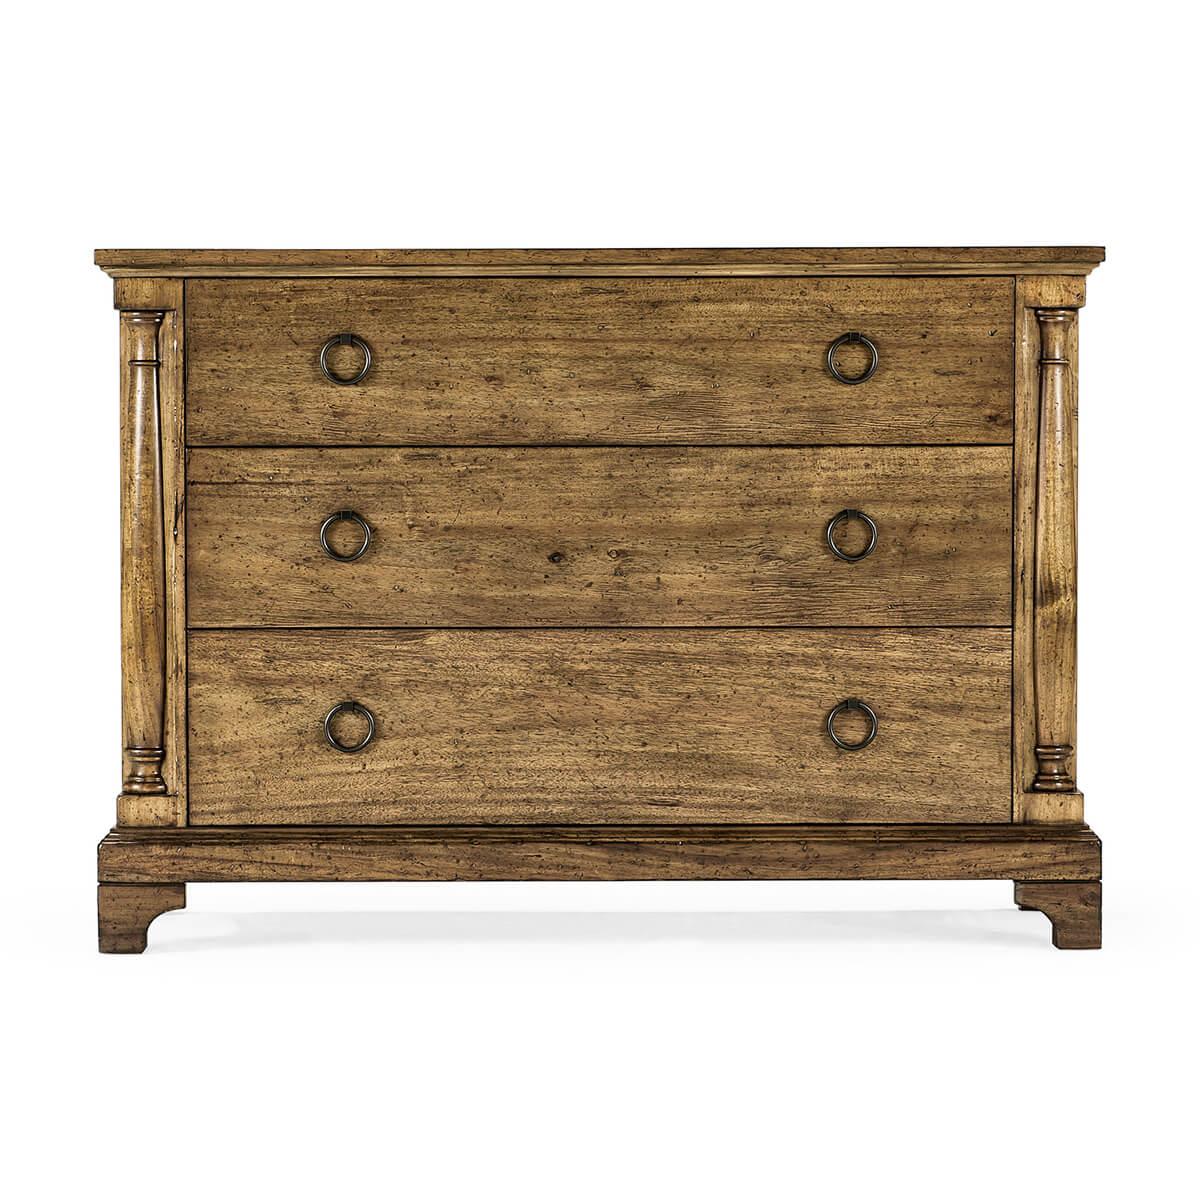 French Country rustic chest of drawers in our medium driftwood finish with three drawers, column form styles, with a stepped pedestal base on bracket feet and brass ring handles.

Dimensions: 47.25